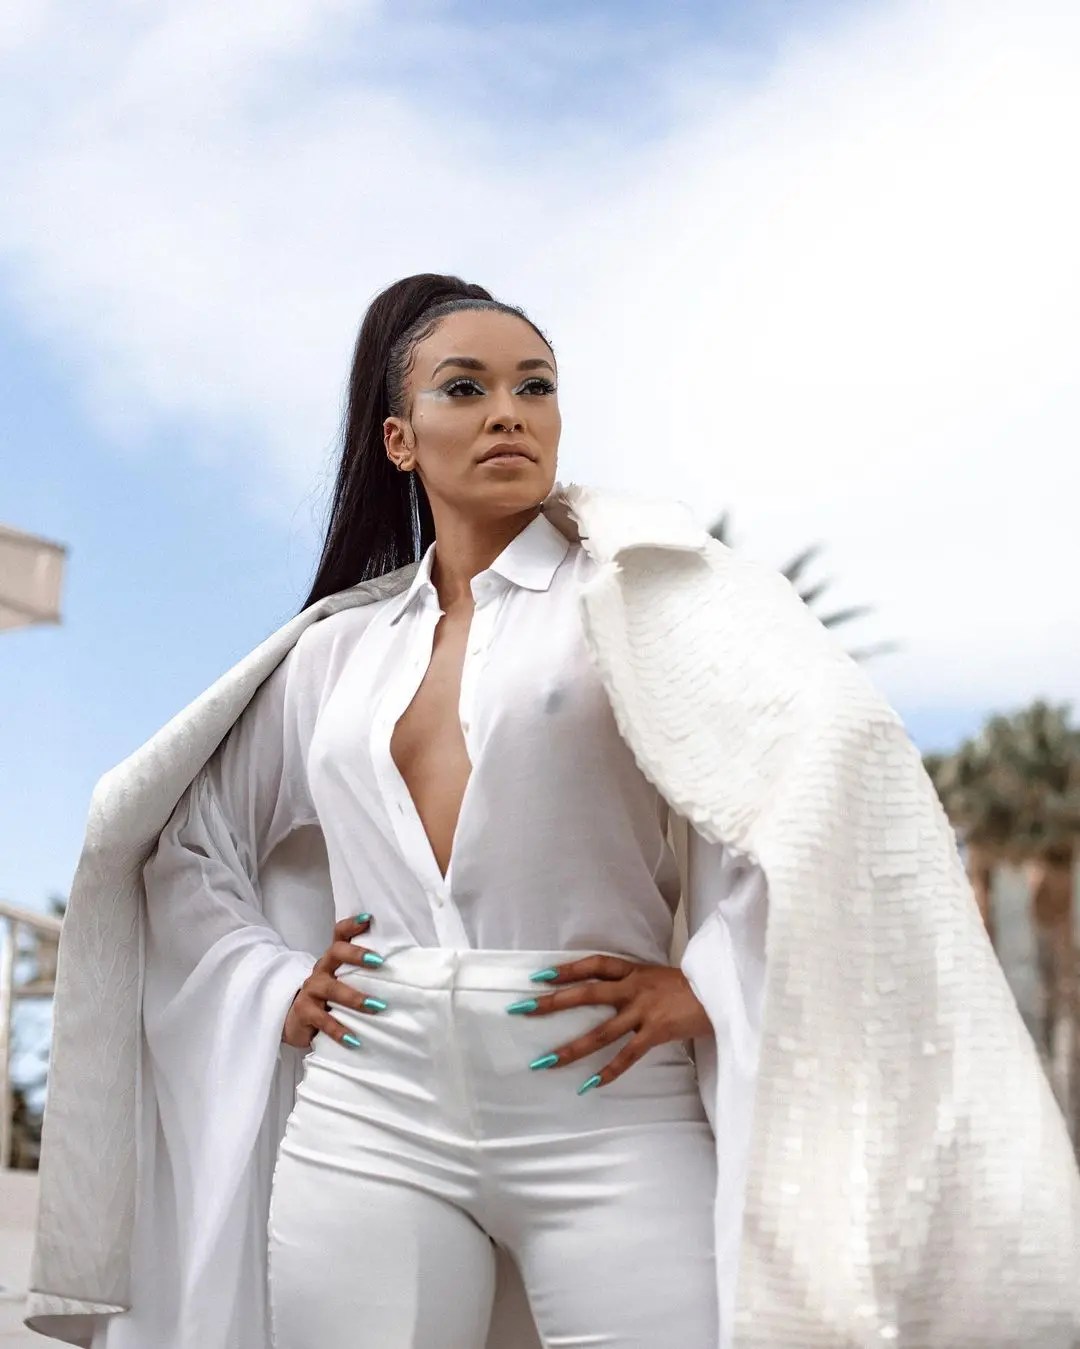 Pearl Thusi’s Fistful of Vengeance goes number 1 on the planet